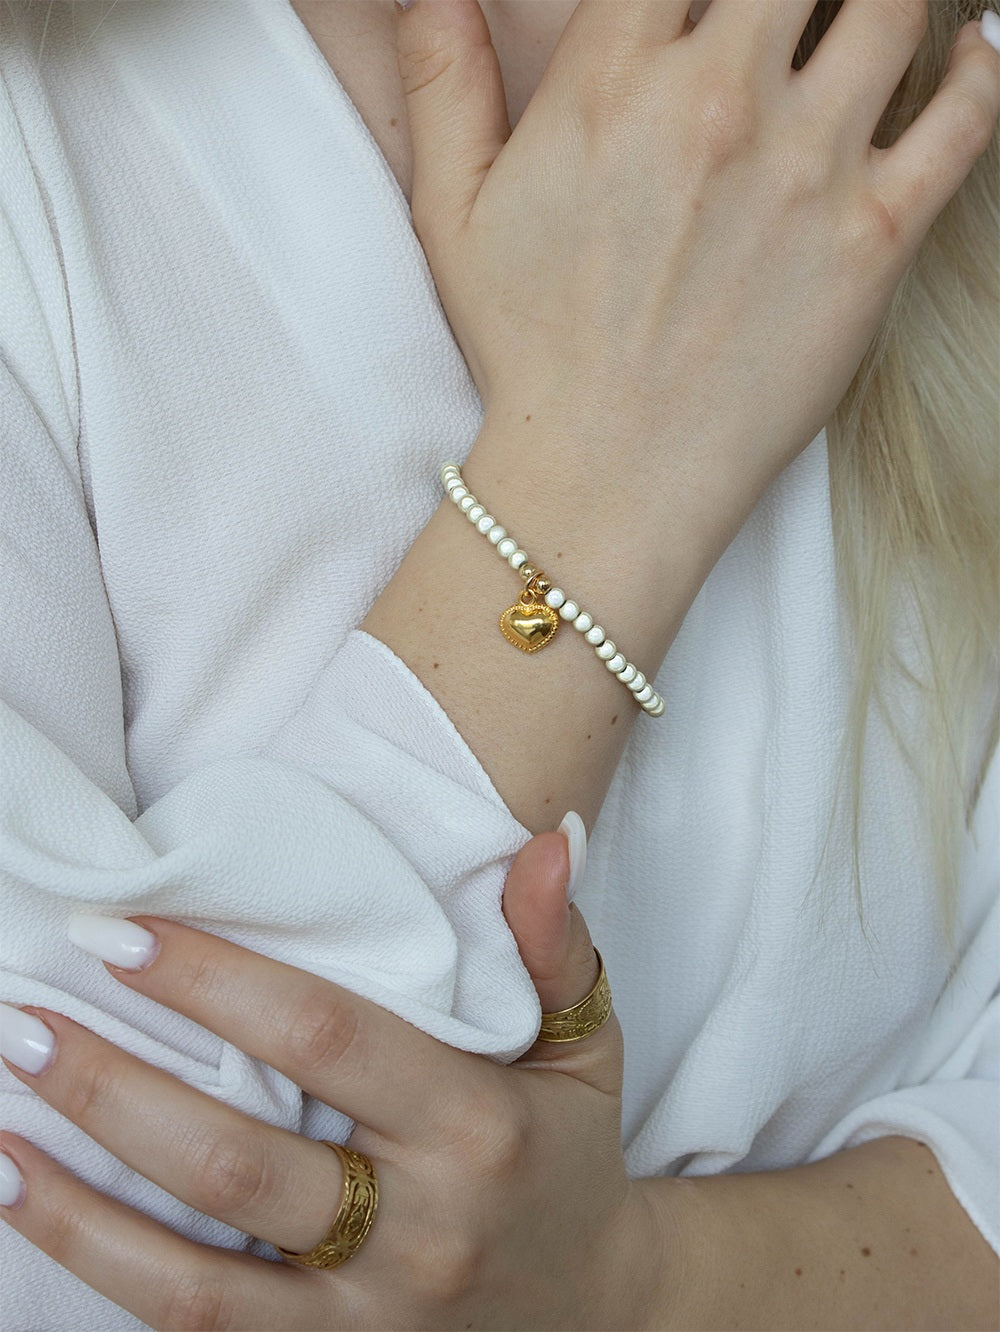 Magic Pearl Armband Valentine Champager Heart Gold